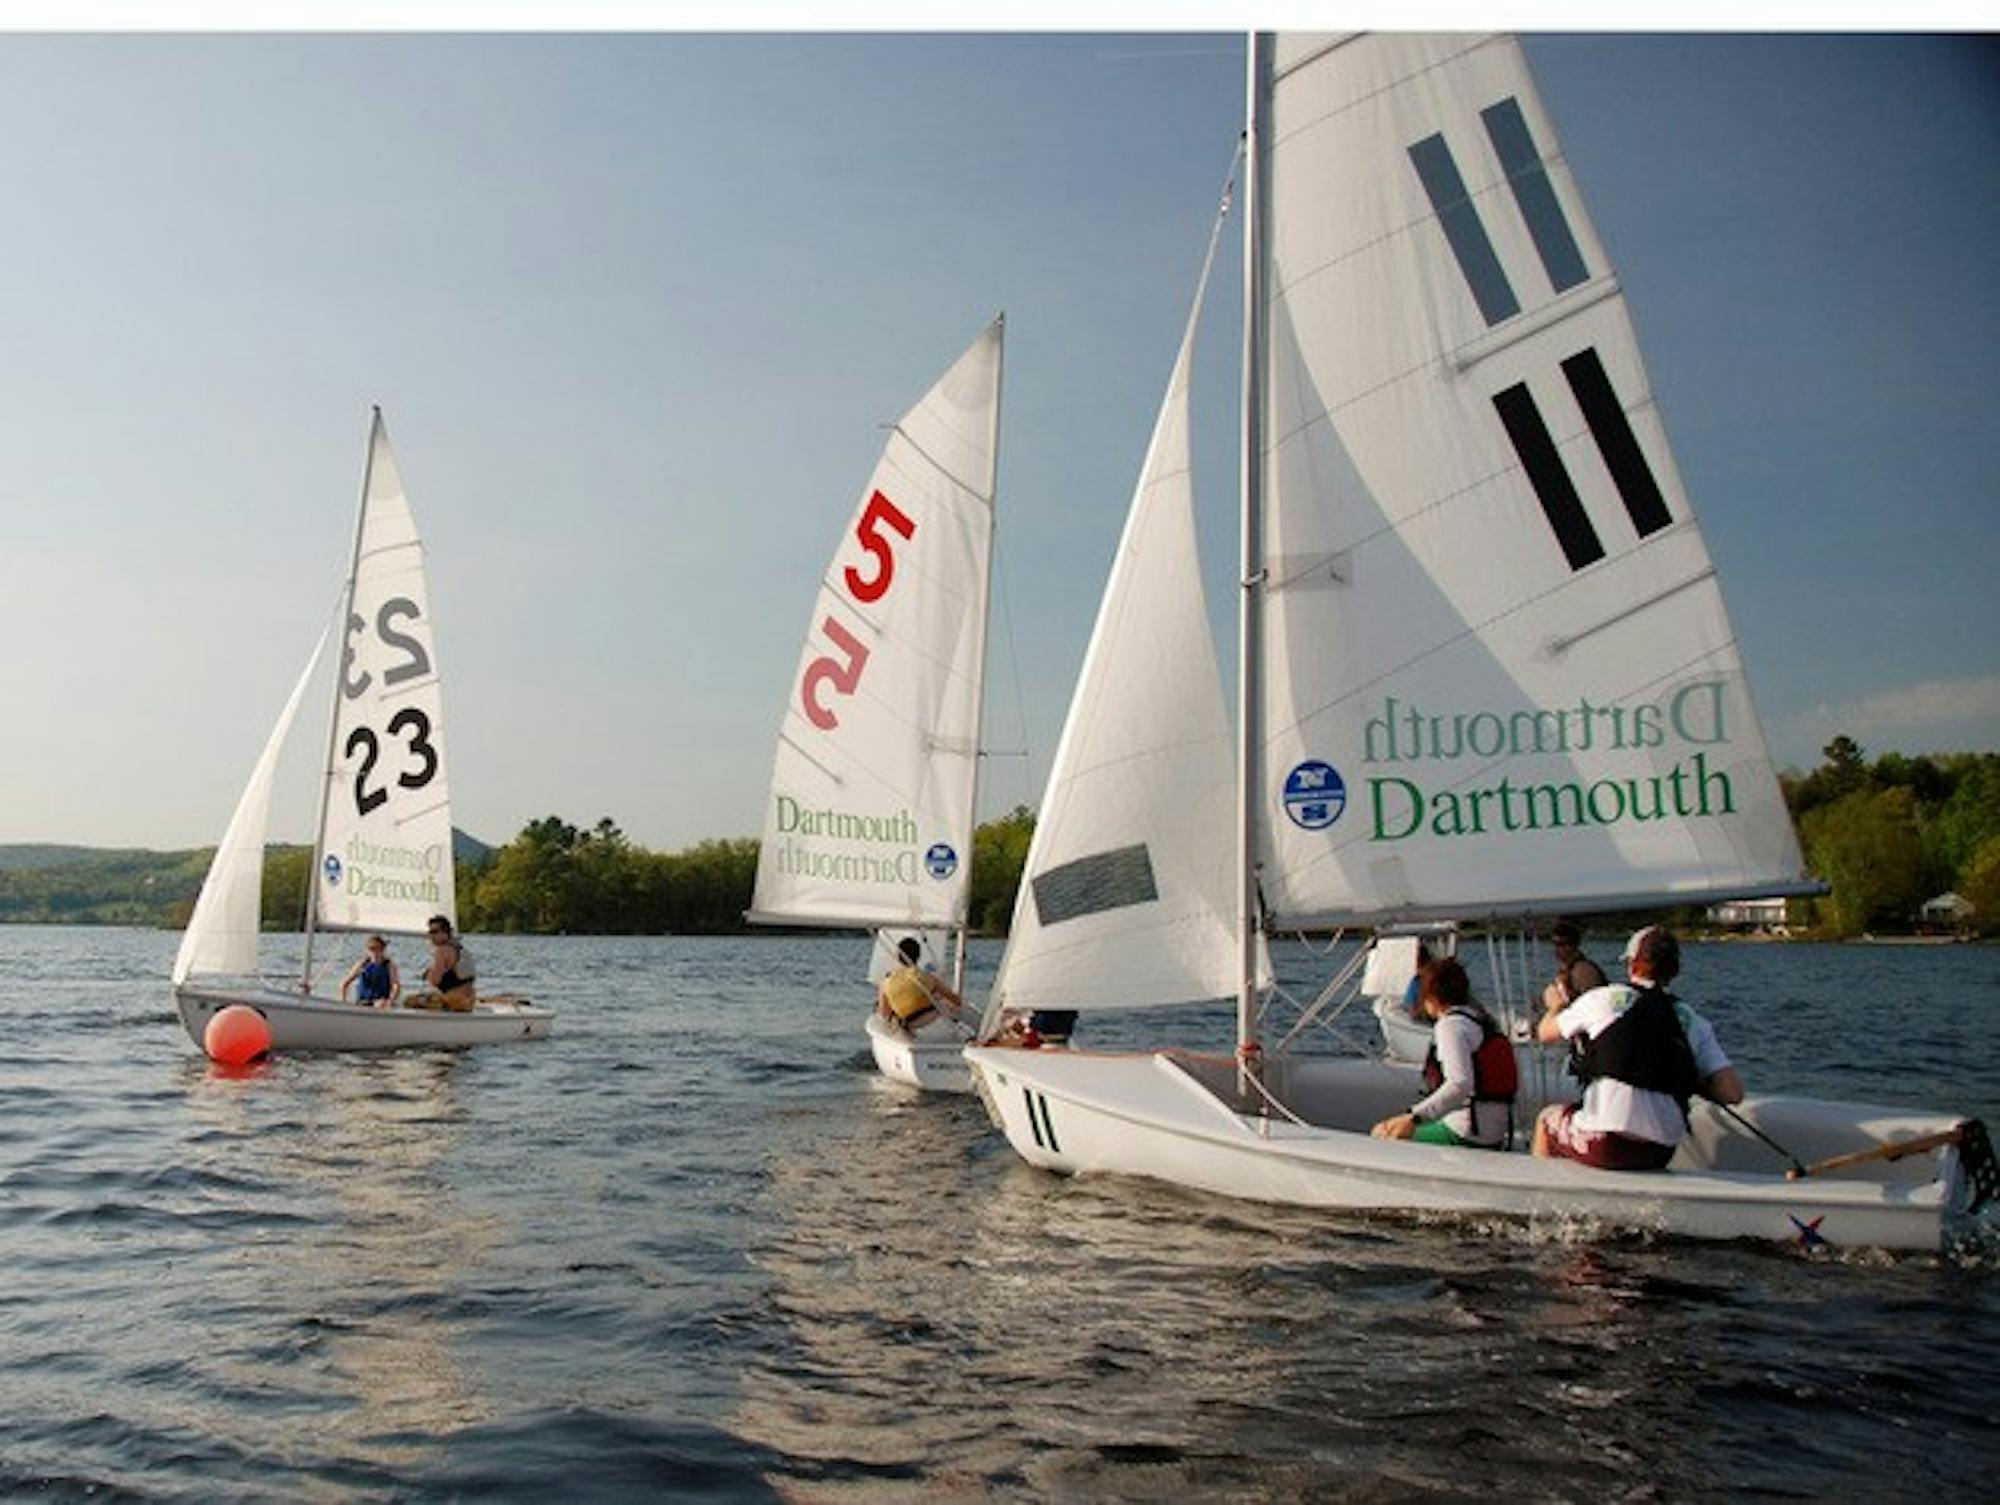 After the departure of last year's seniors like Erik Storck '07, sailing is in search of a new formula for success.